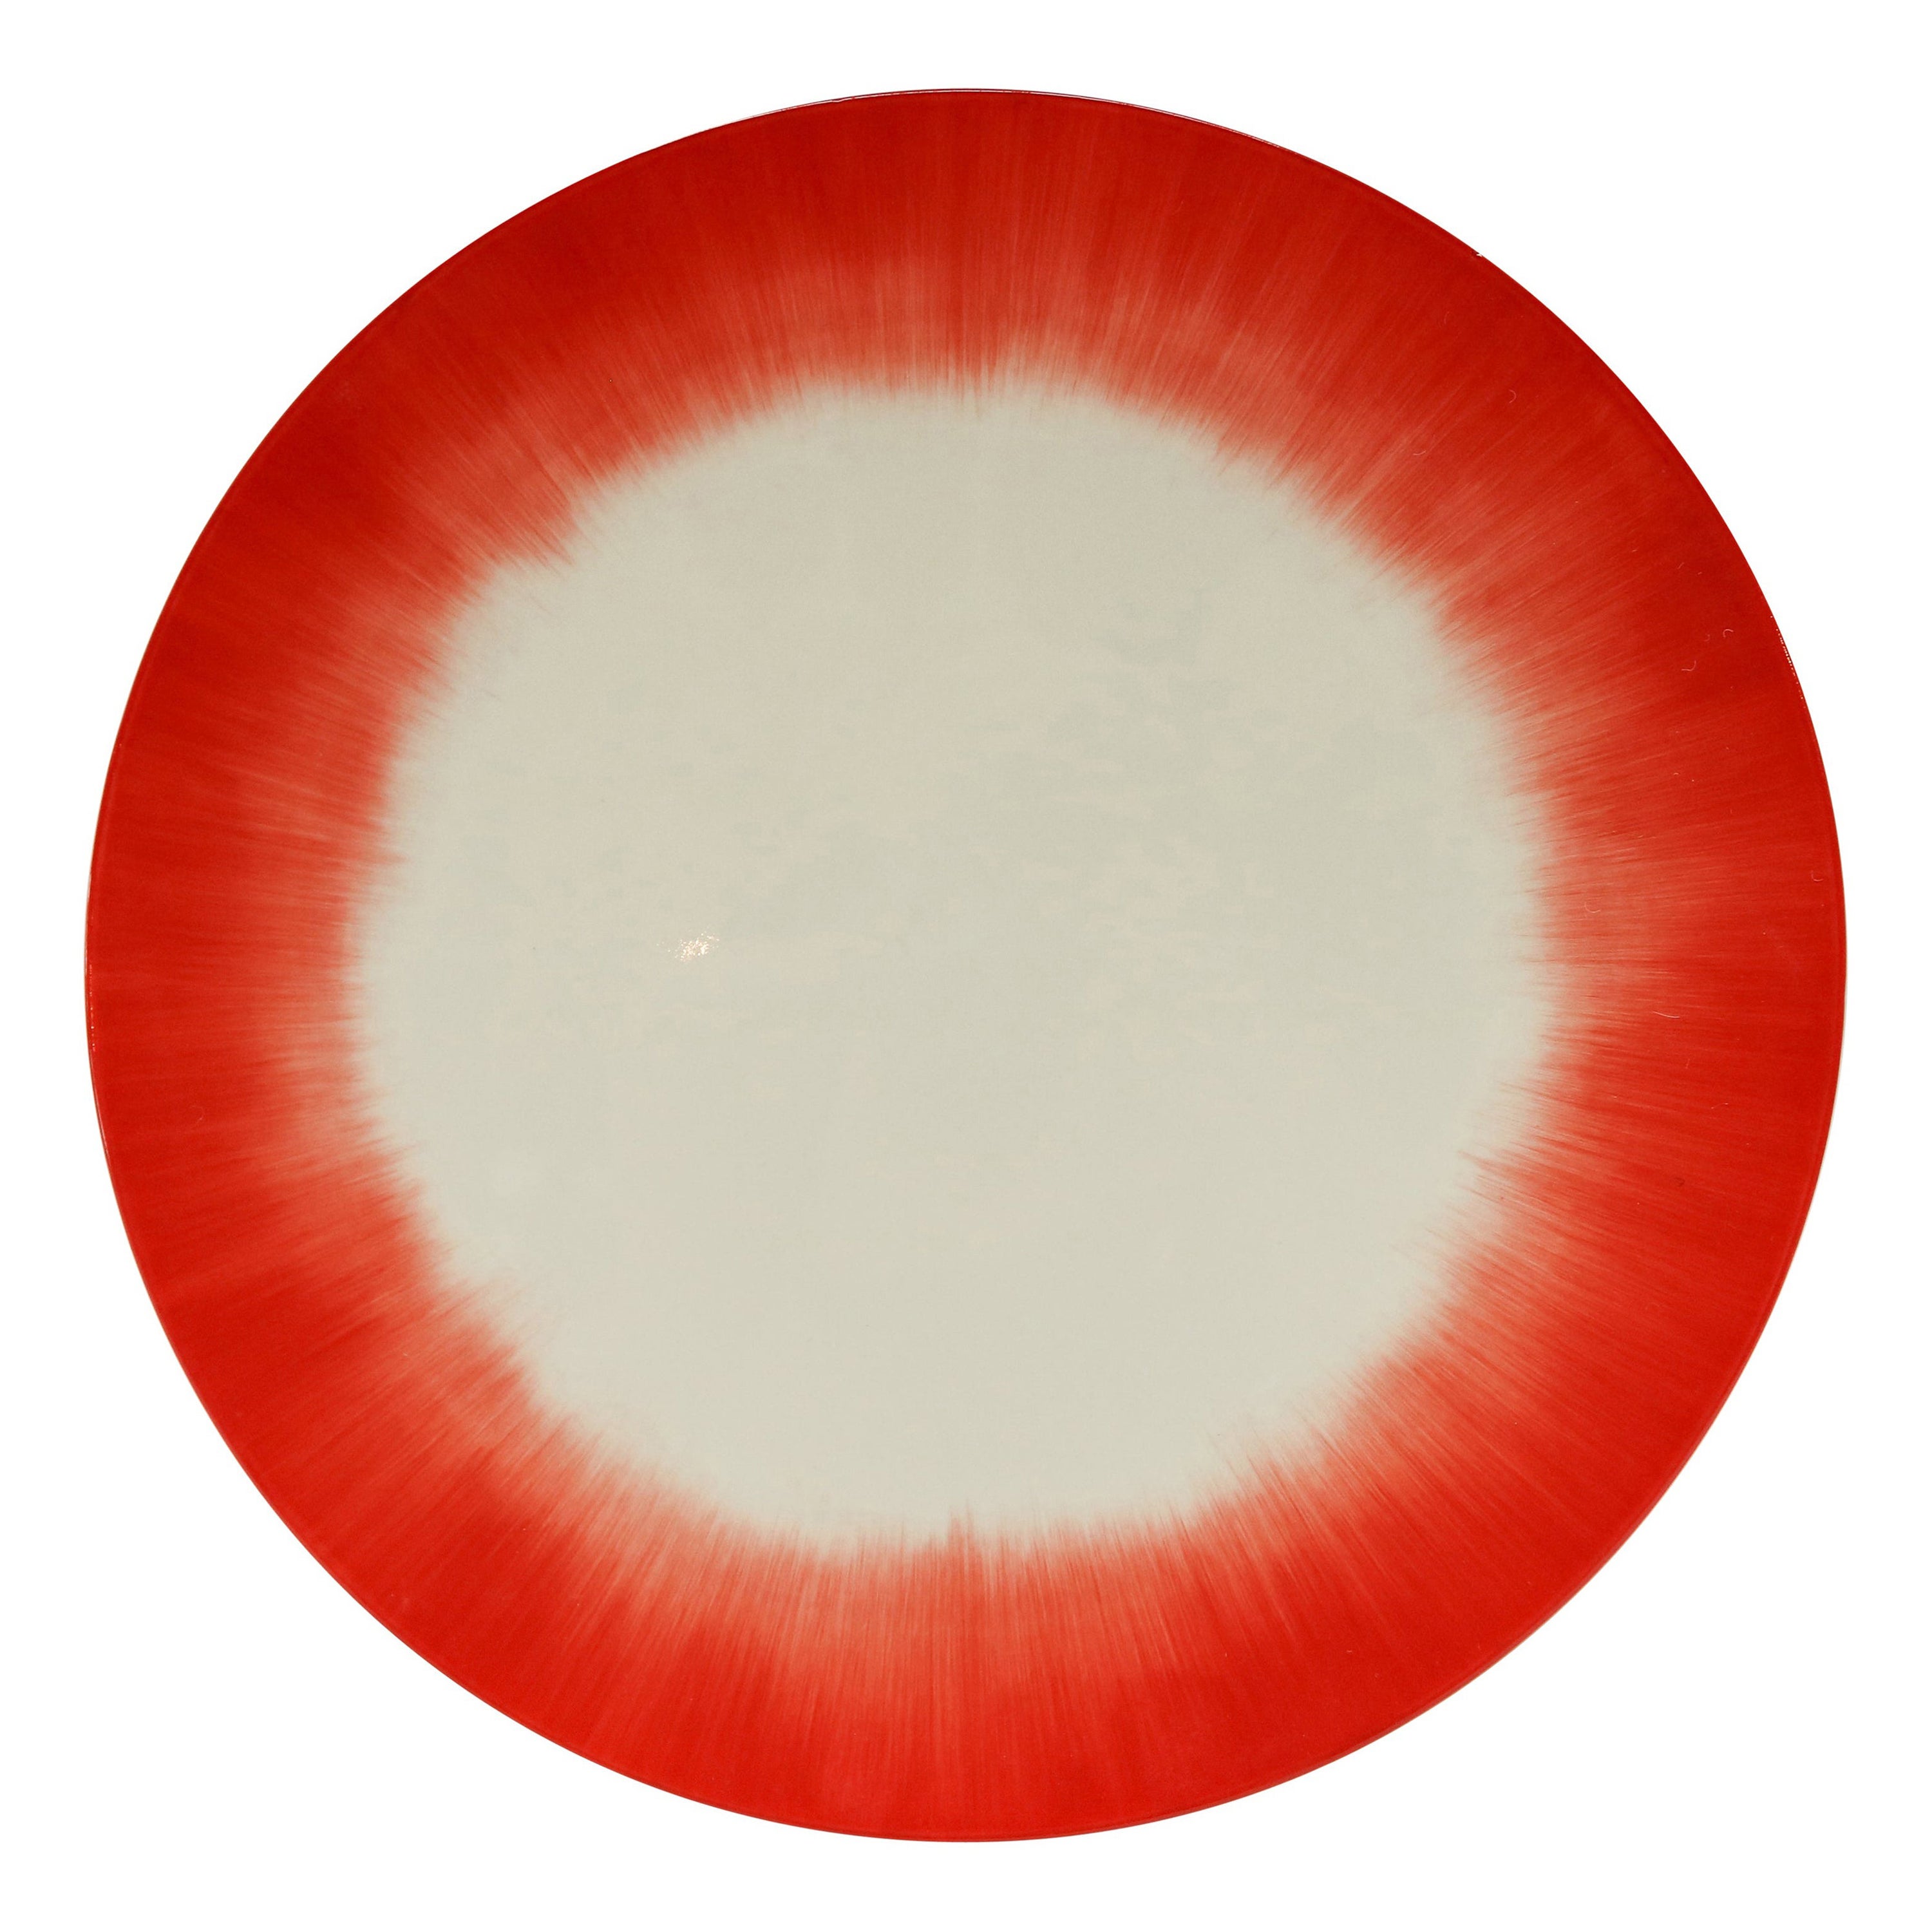 Ann Demeulemeester for Serax Dé Dinner Plate / Charger in off White / Red